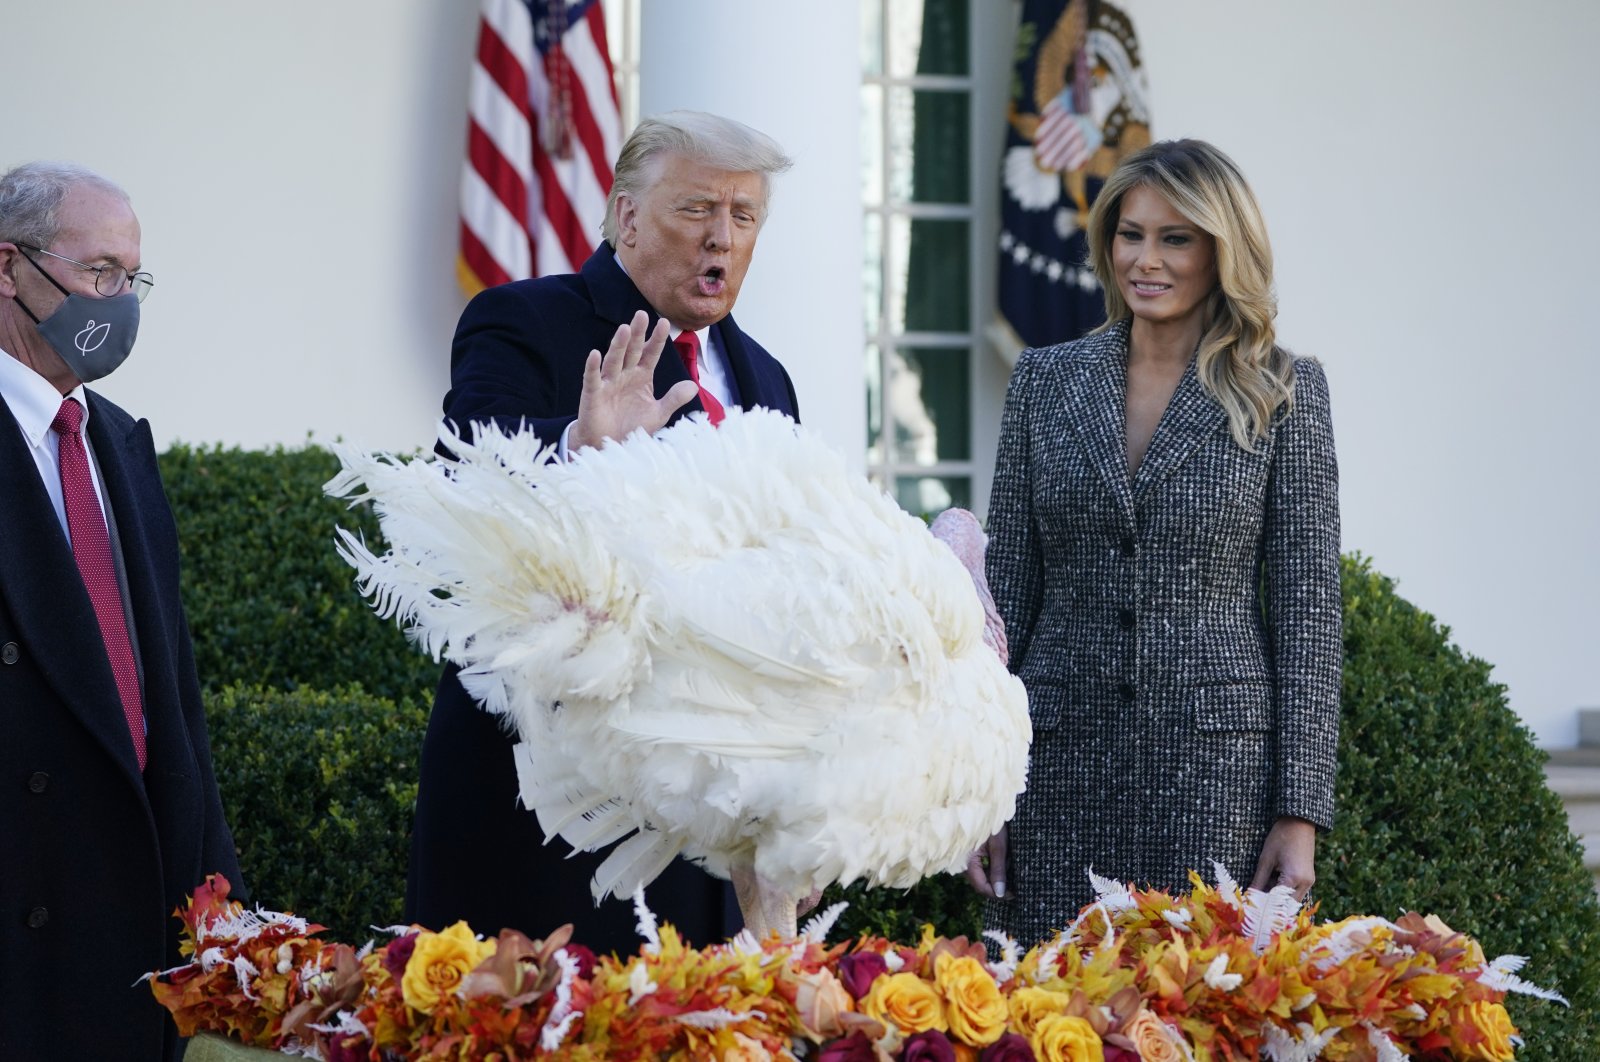 President Donald Trump (C) pardons Corn, the national Thanksgiving turkey, as National Turkey Federation Chairman Ron Kardel (L) of Walcott, Iowa, and first lady Melania Trump (R) look on in the Rose Garden of the White House in Washington, D.C., Nov. 24, 2020. (AP Photo)